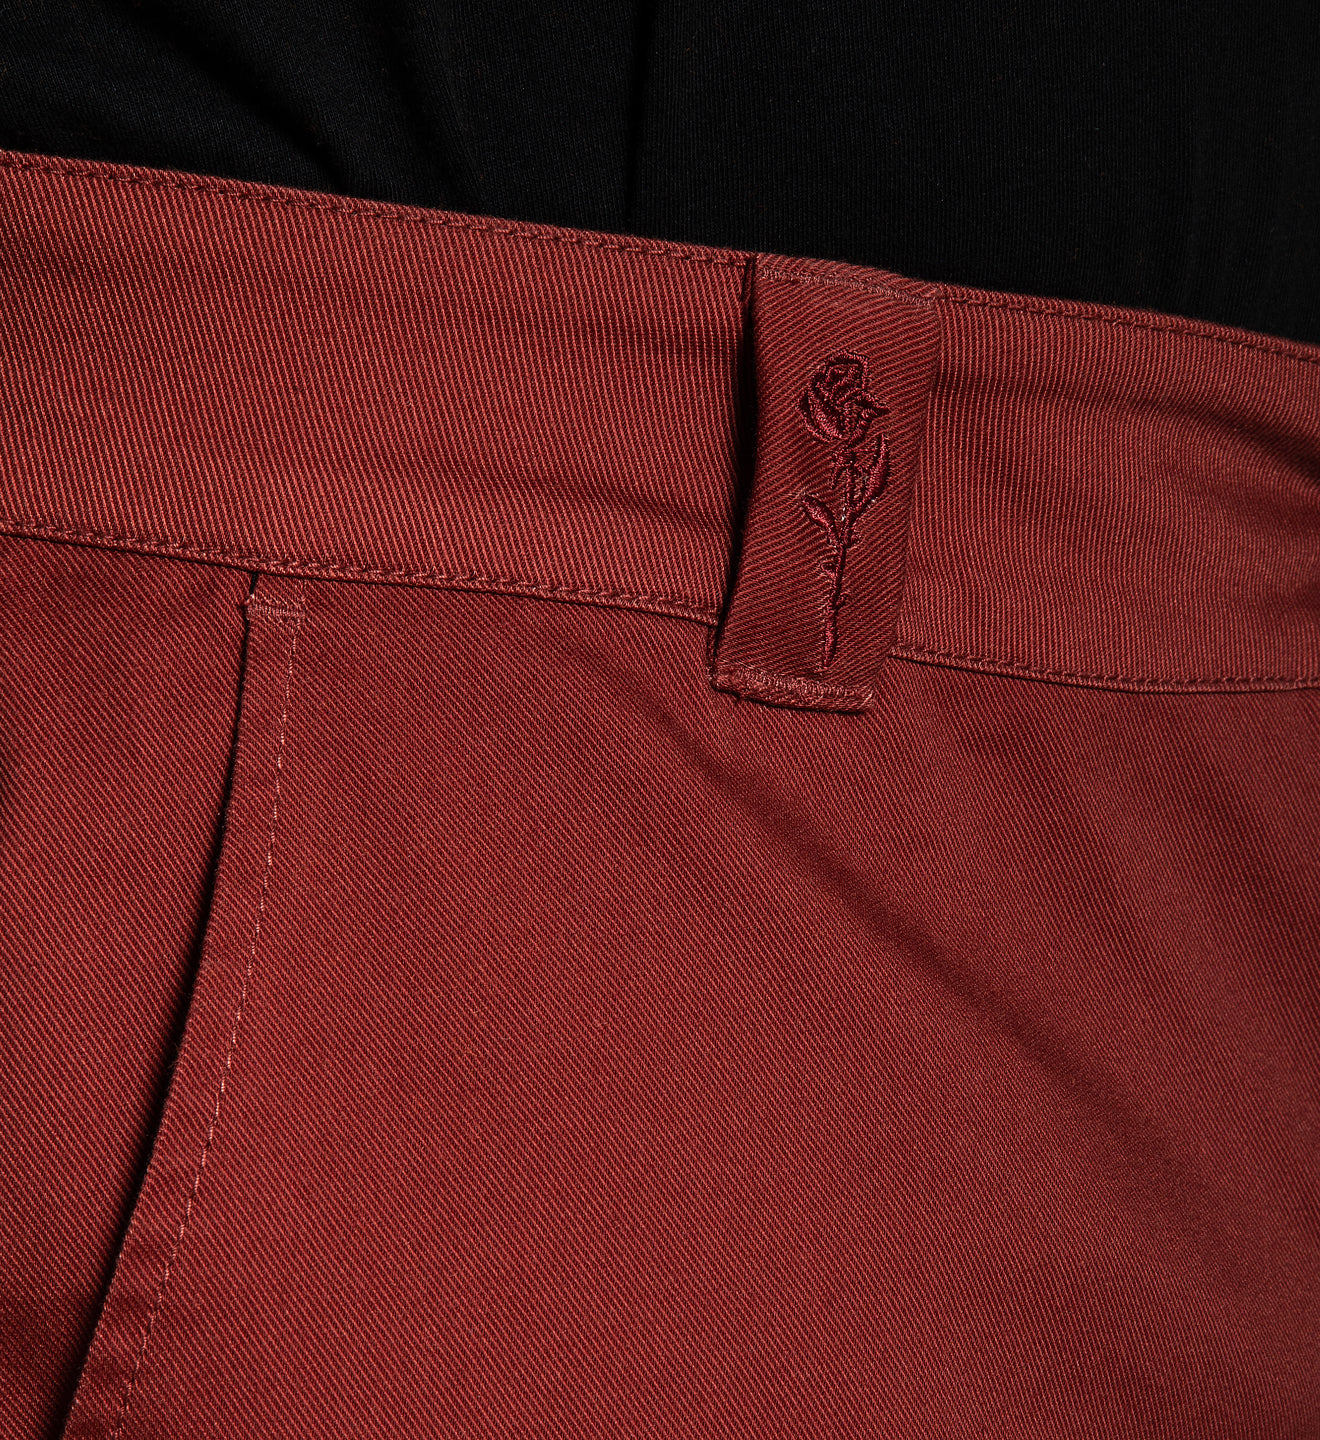 925 Relaxed fit Chino Stretch Pant Cherry Mahogany